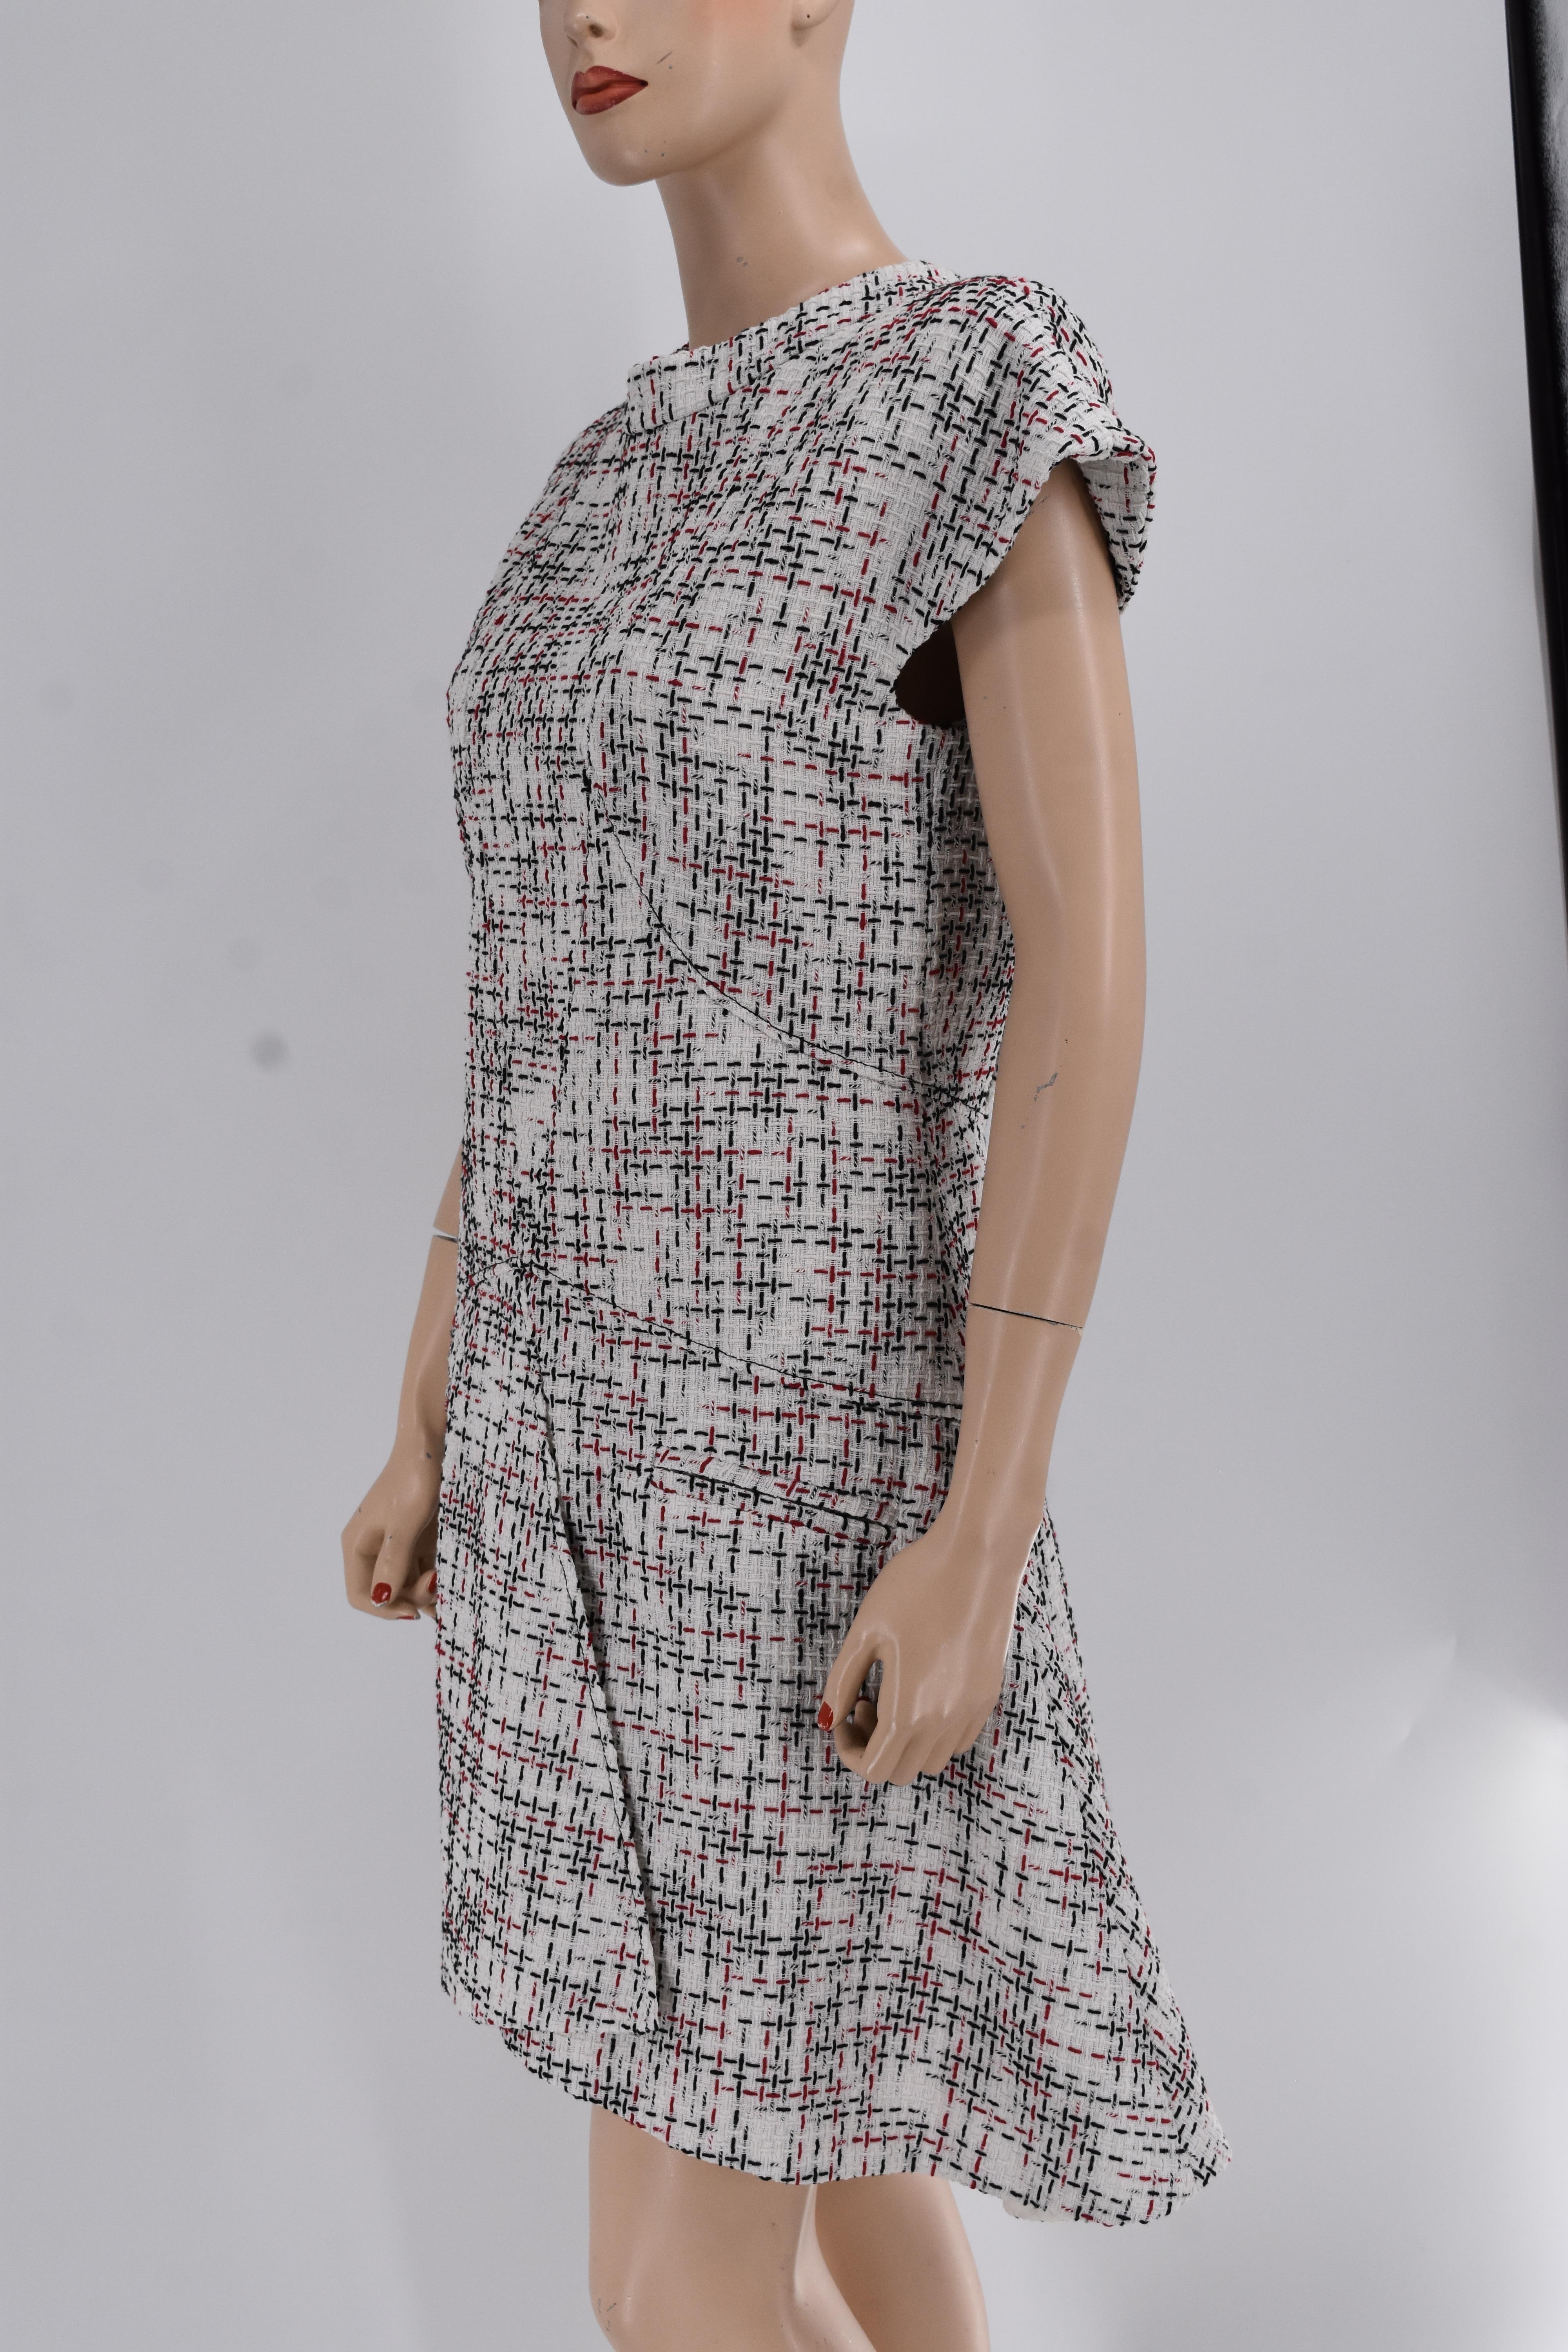 Chanel dress from Chanel Spring 2015 collection. This is new with tag.